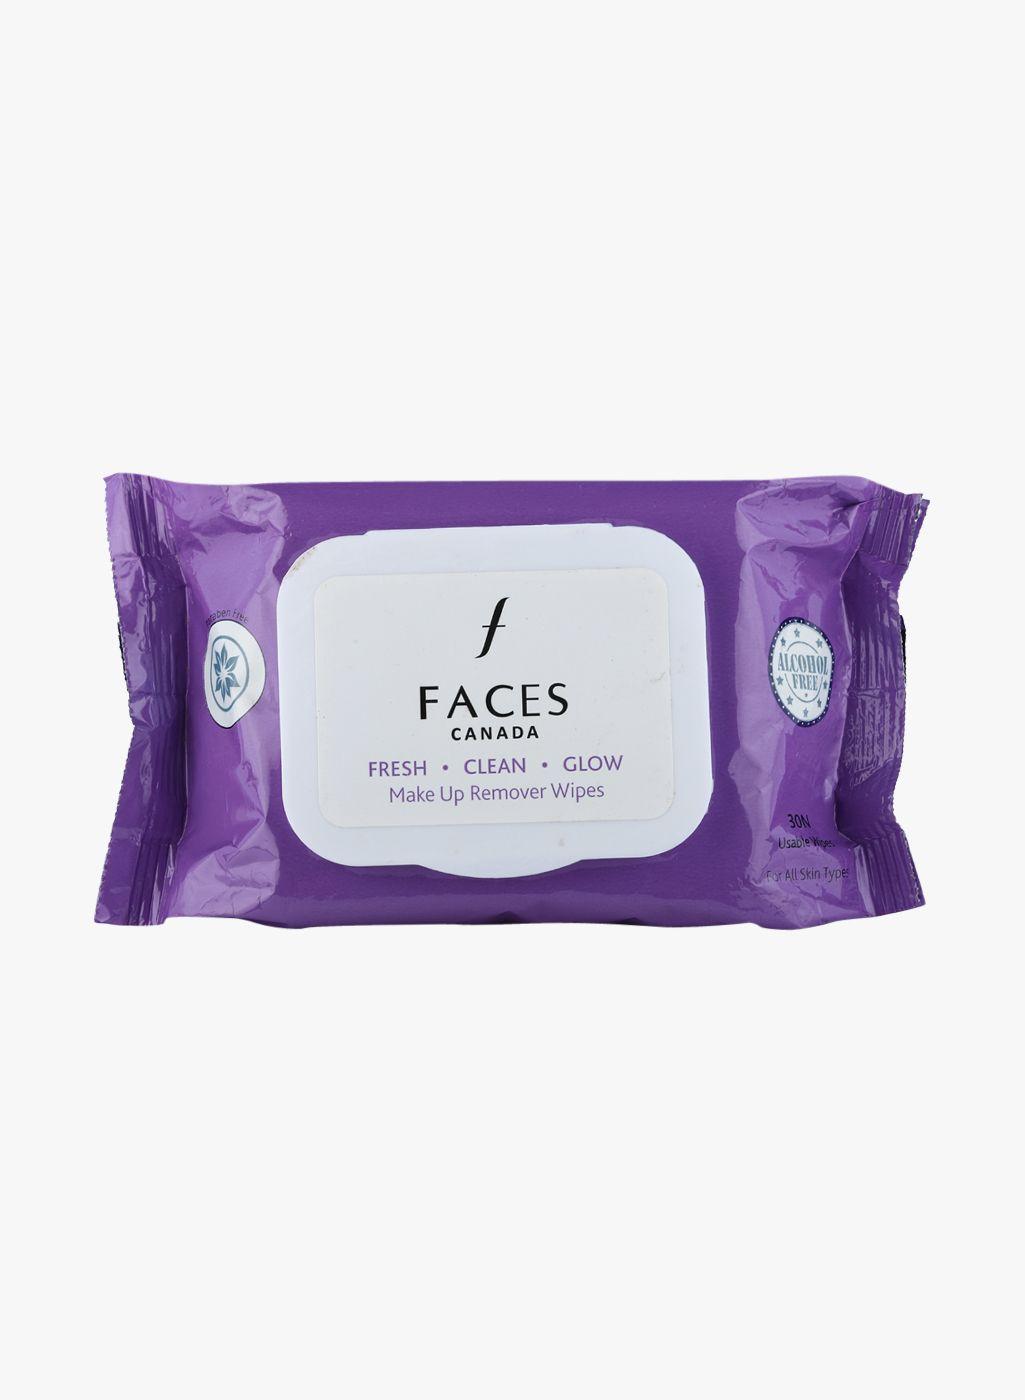 faces canada fresh clean glow makeup remover wipes 30n